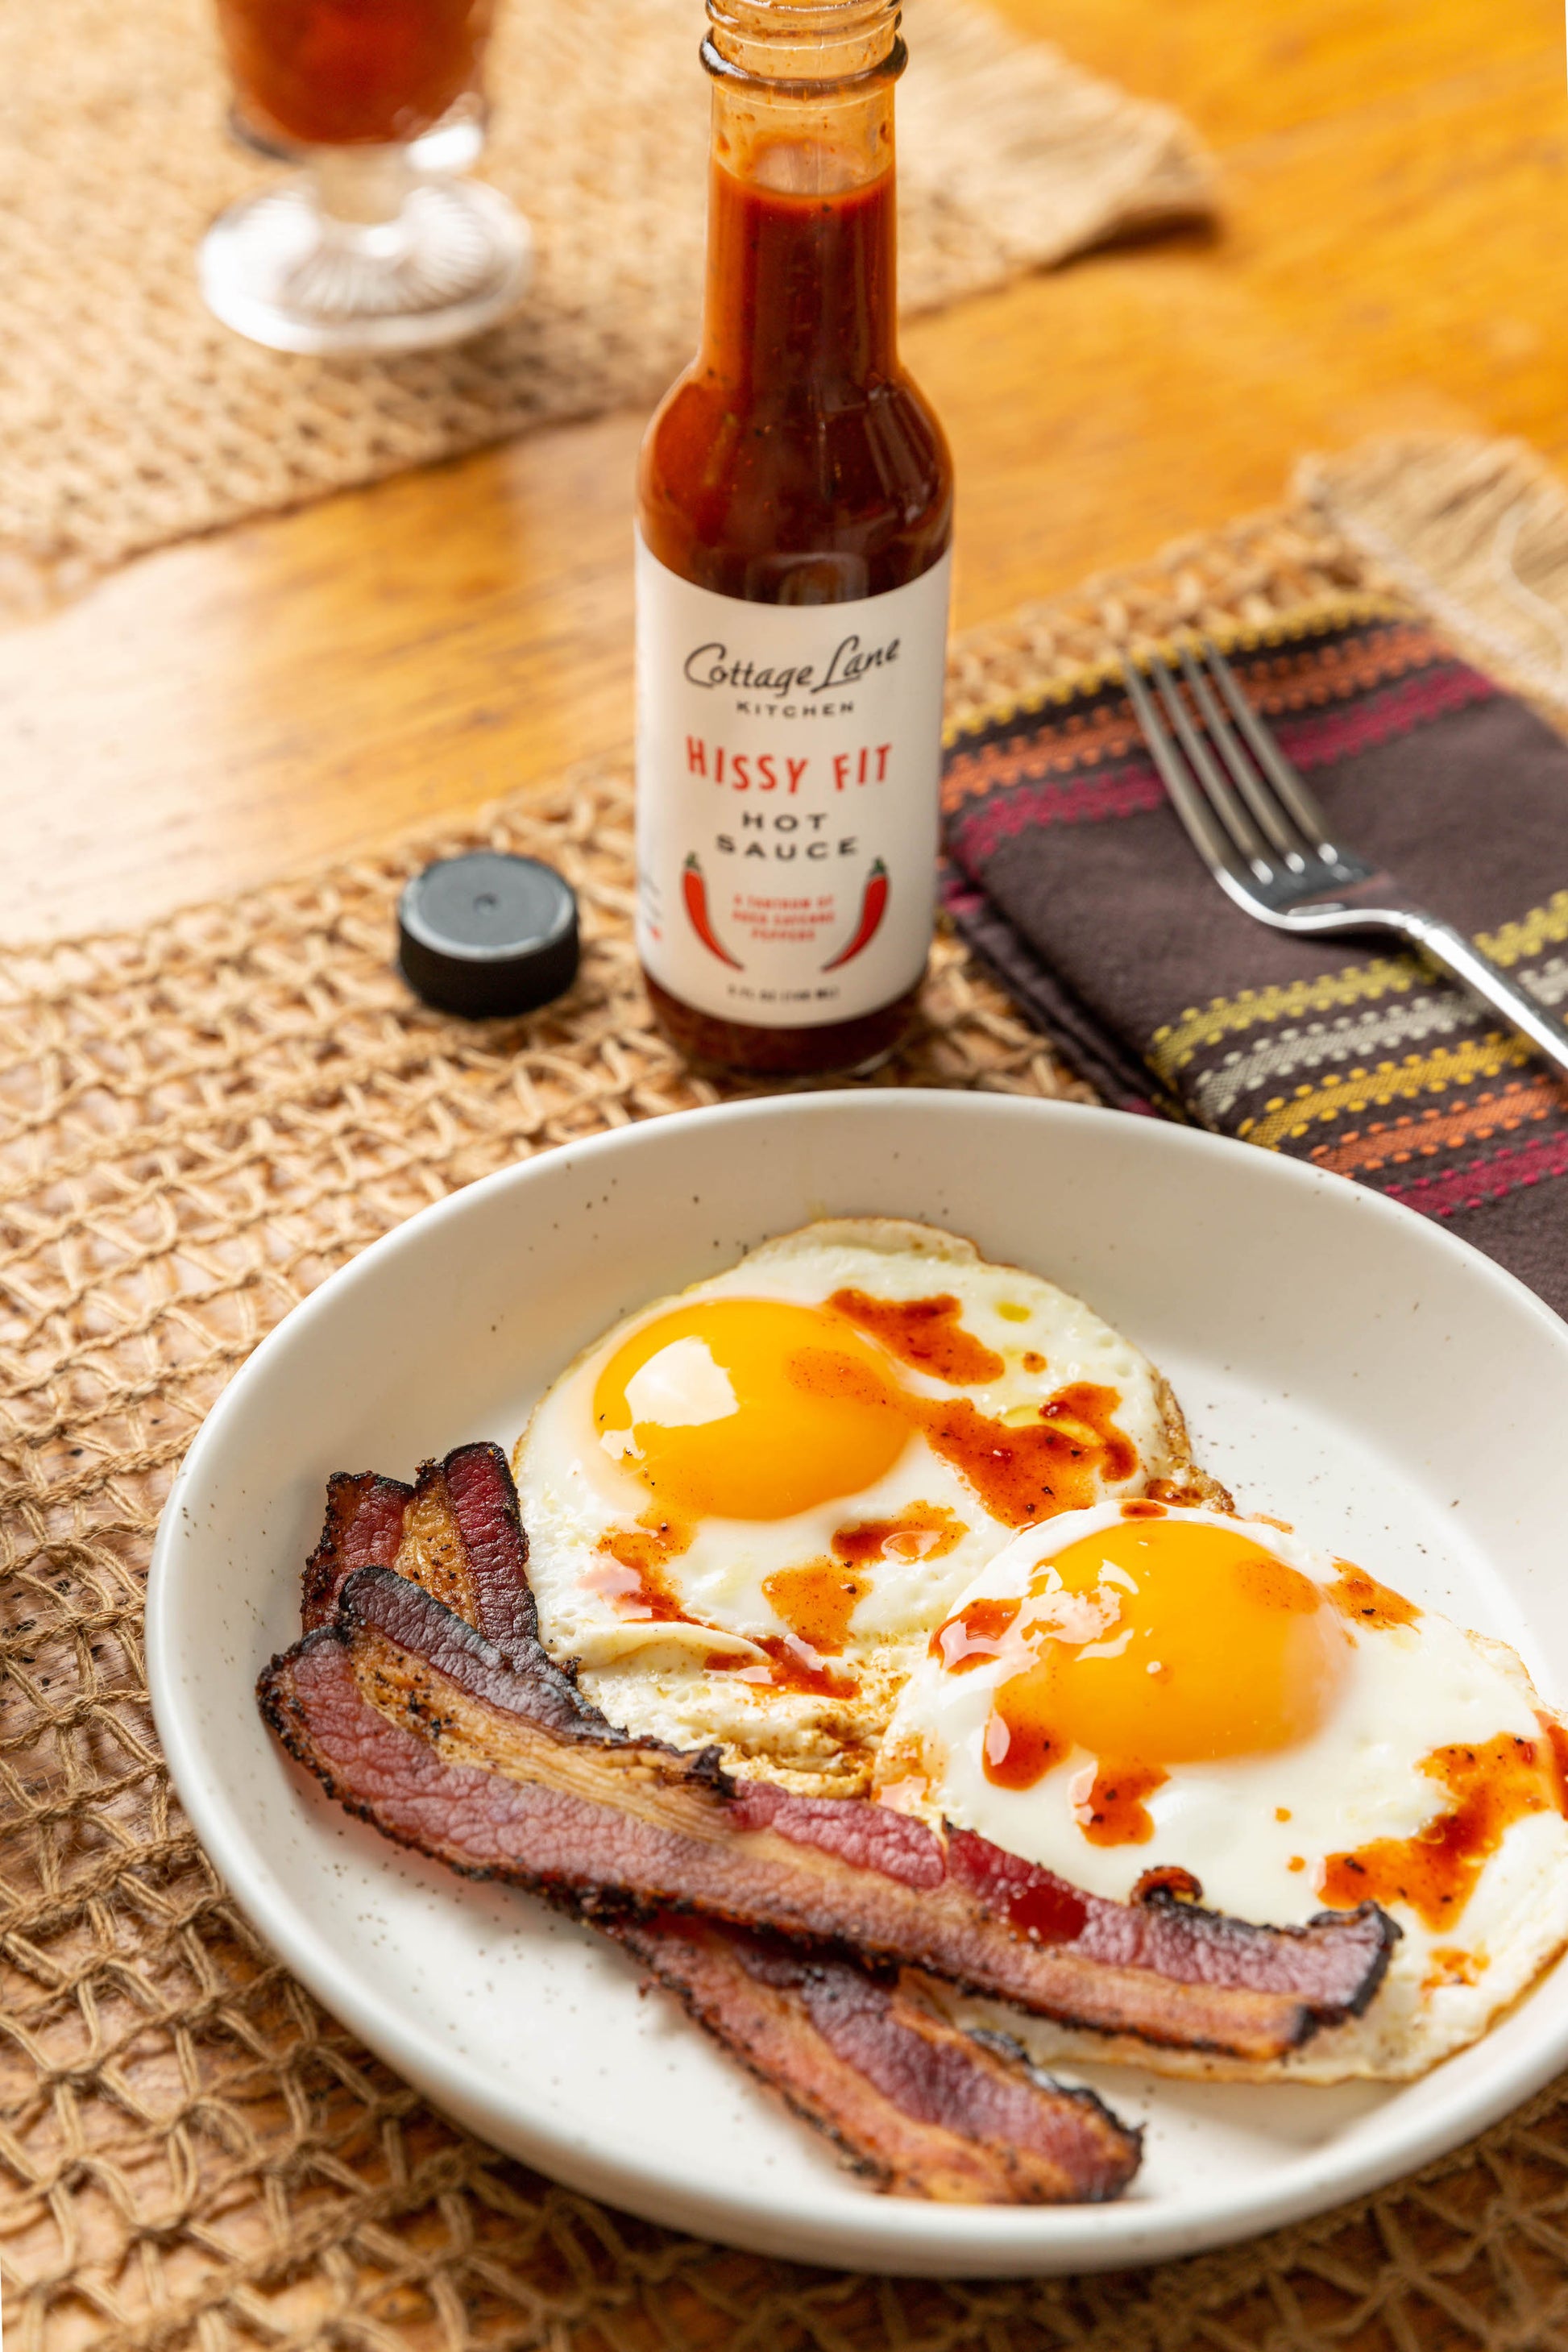 Eggs and Bacon with Hissy Fit Hot Sauce by Cottage Lane Kitchen